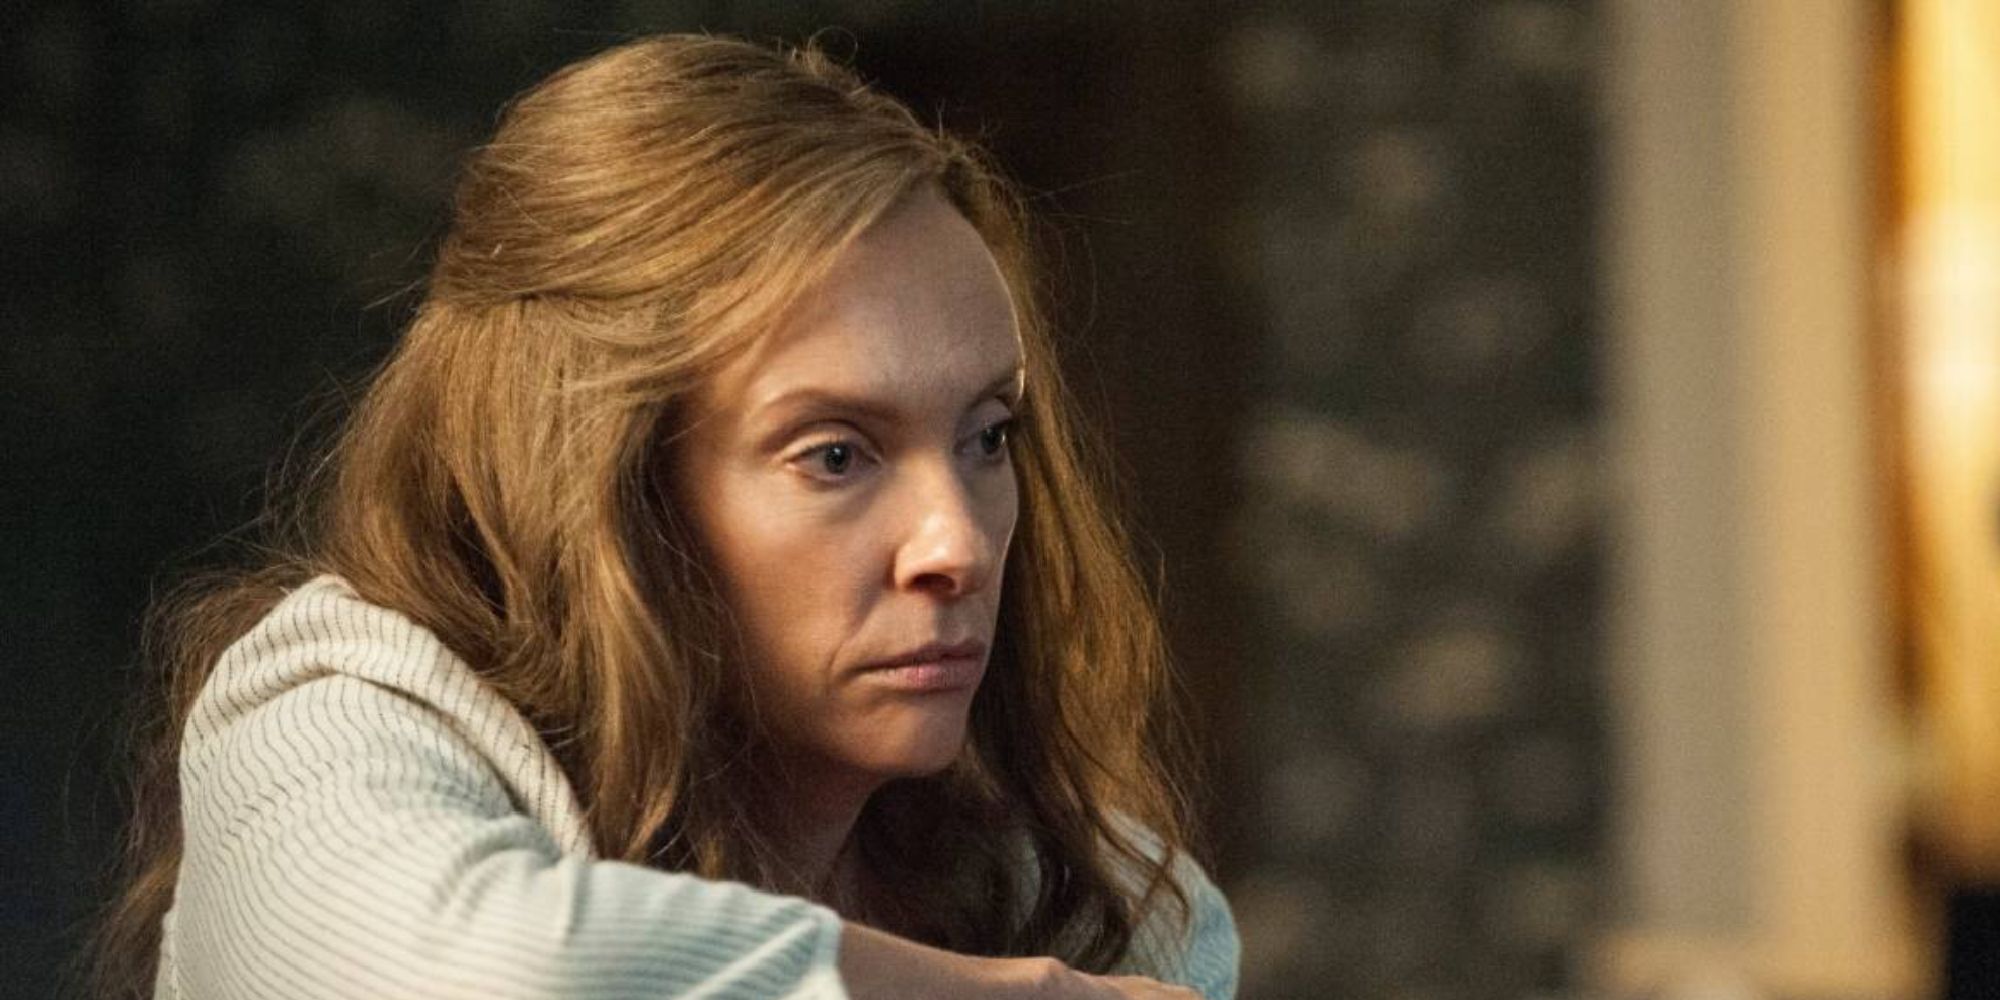 Toni Collette with a deadpan expression in 'Hereditary'